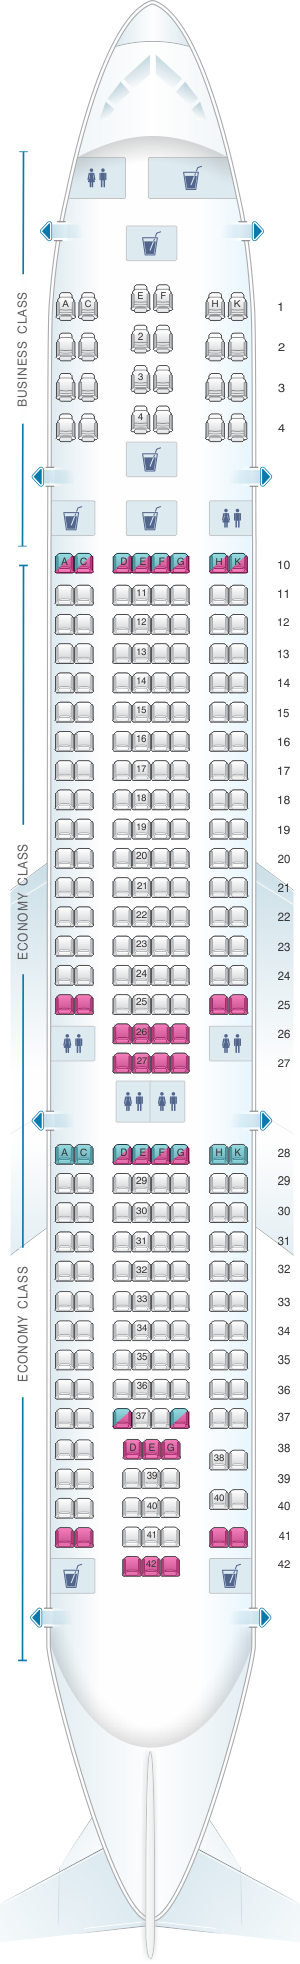 Seat map for TAP Air Portugal Airbus A330 200 V1